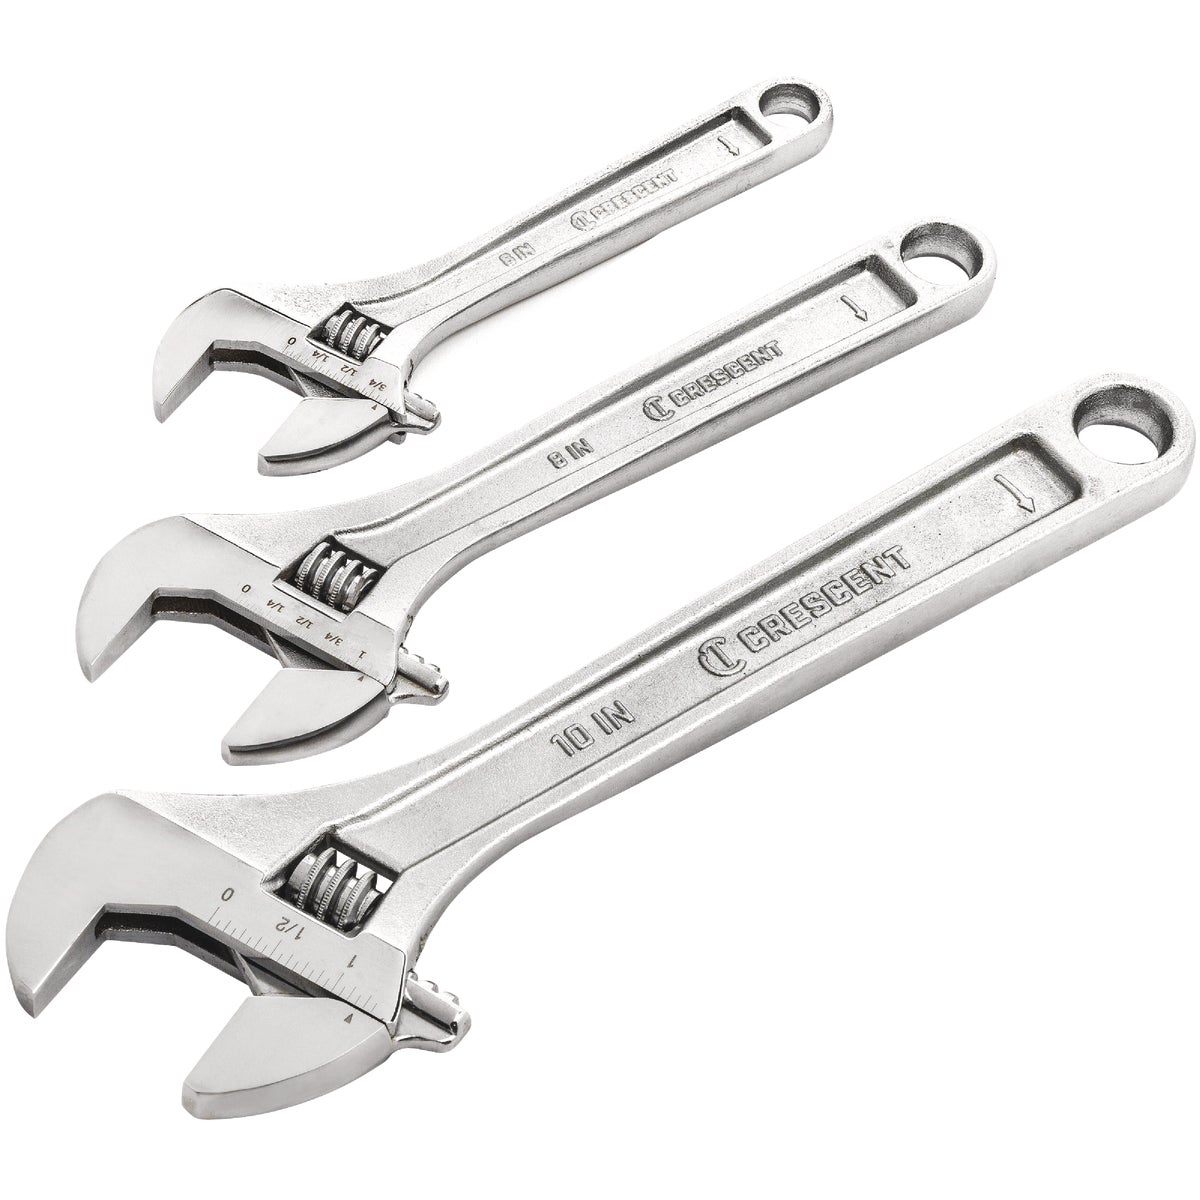 Crescent 6 In., 8 In., 10 In. Adjustable Wrench Set (3-Piece)